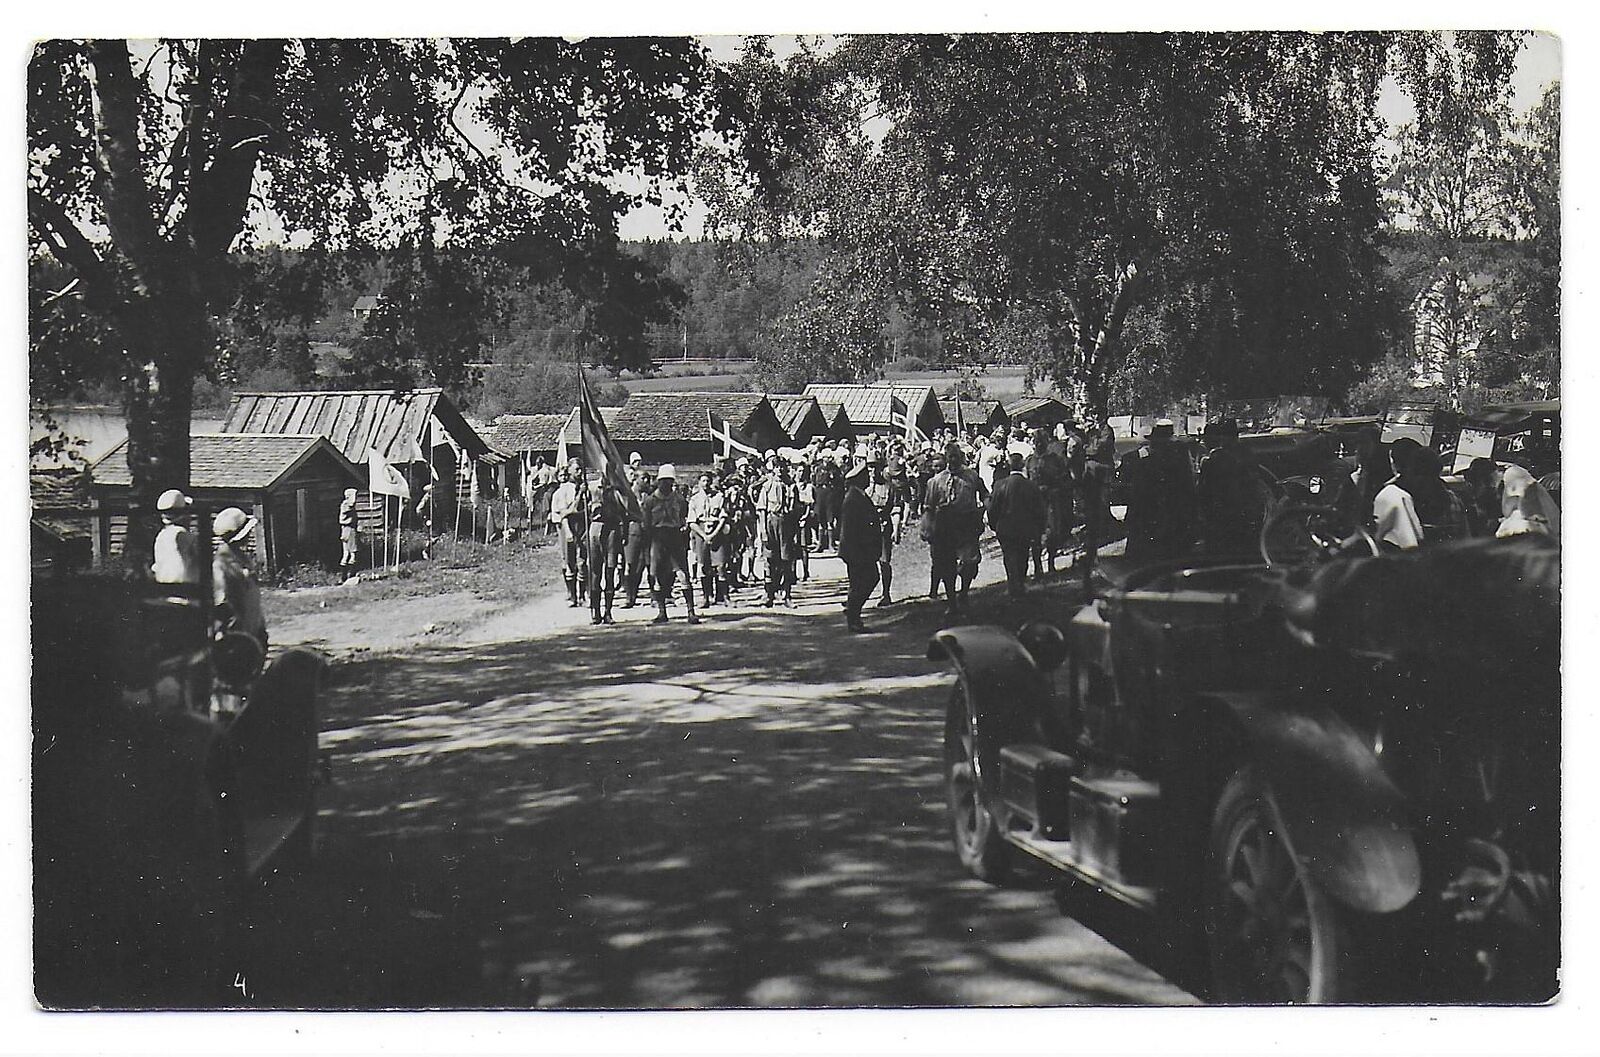 Boy Scout YMCA Rättvik Dalarna Province Sweden Vintage Camp Marching with flags